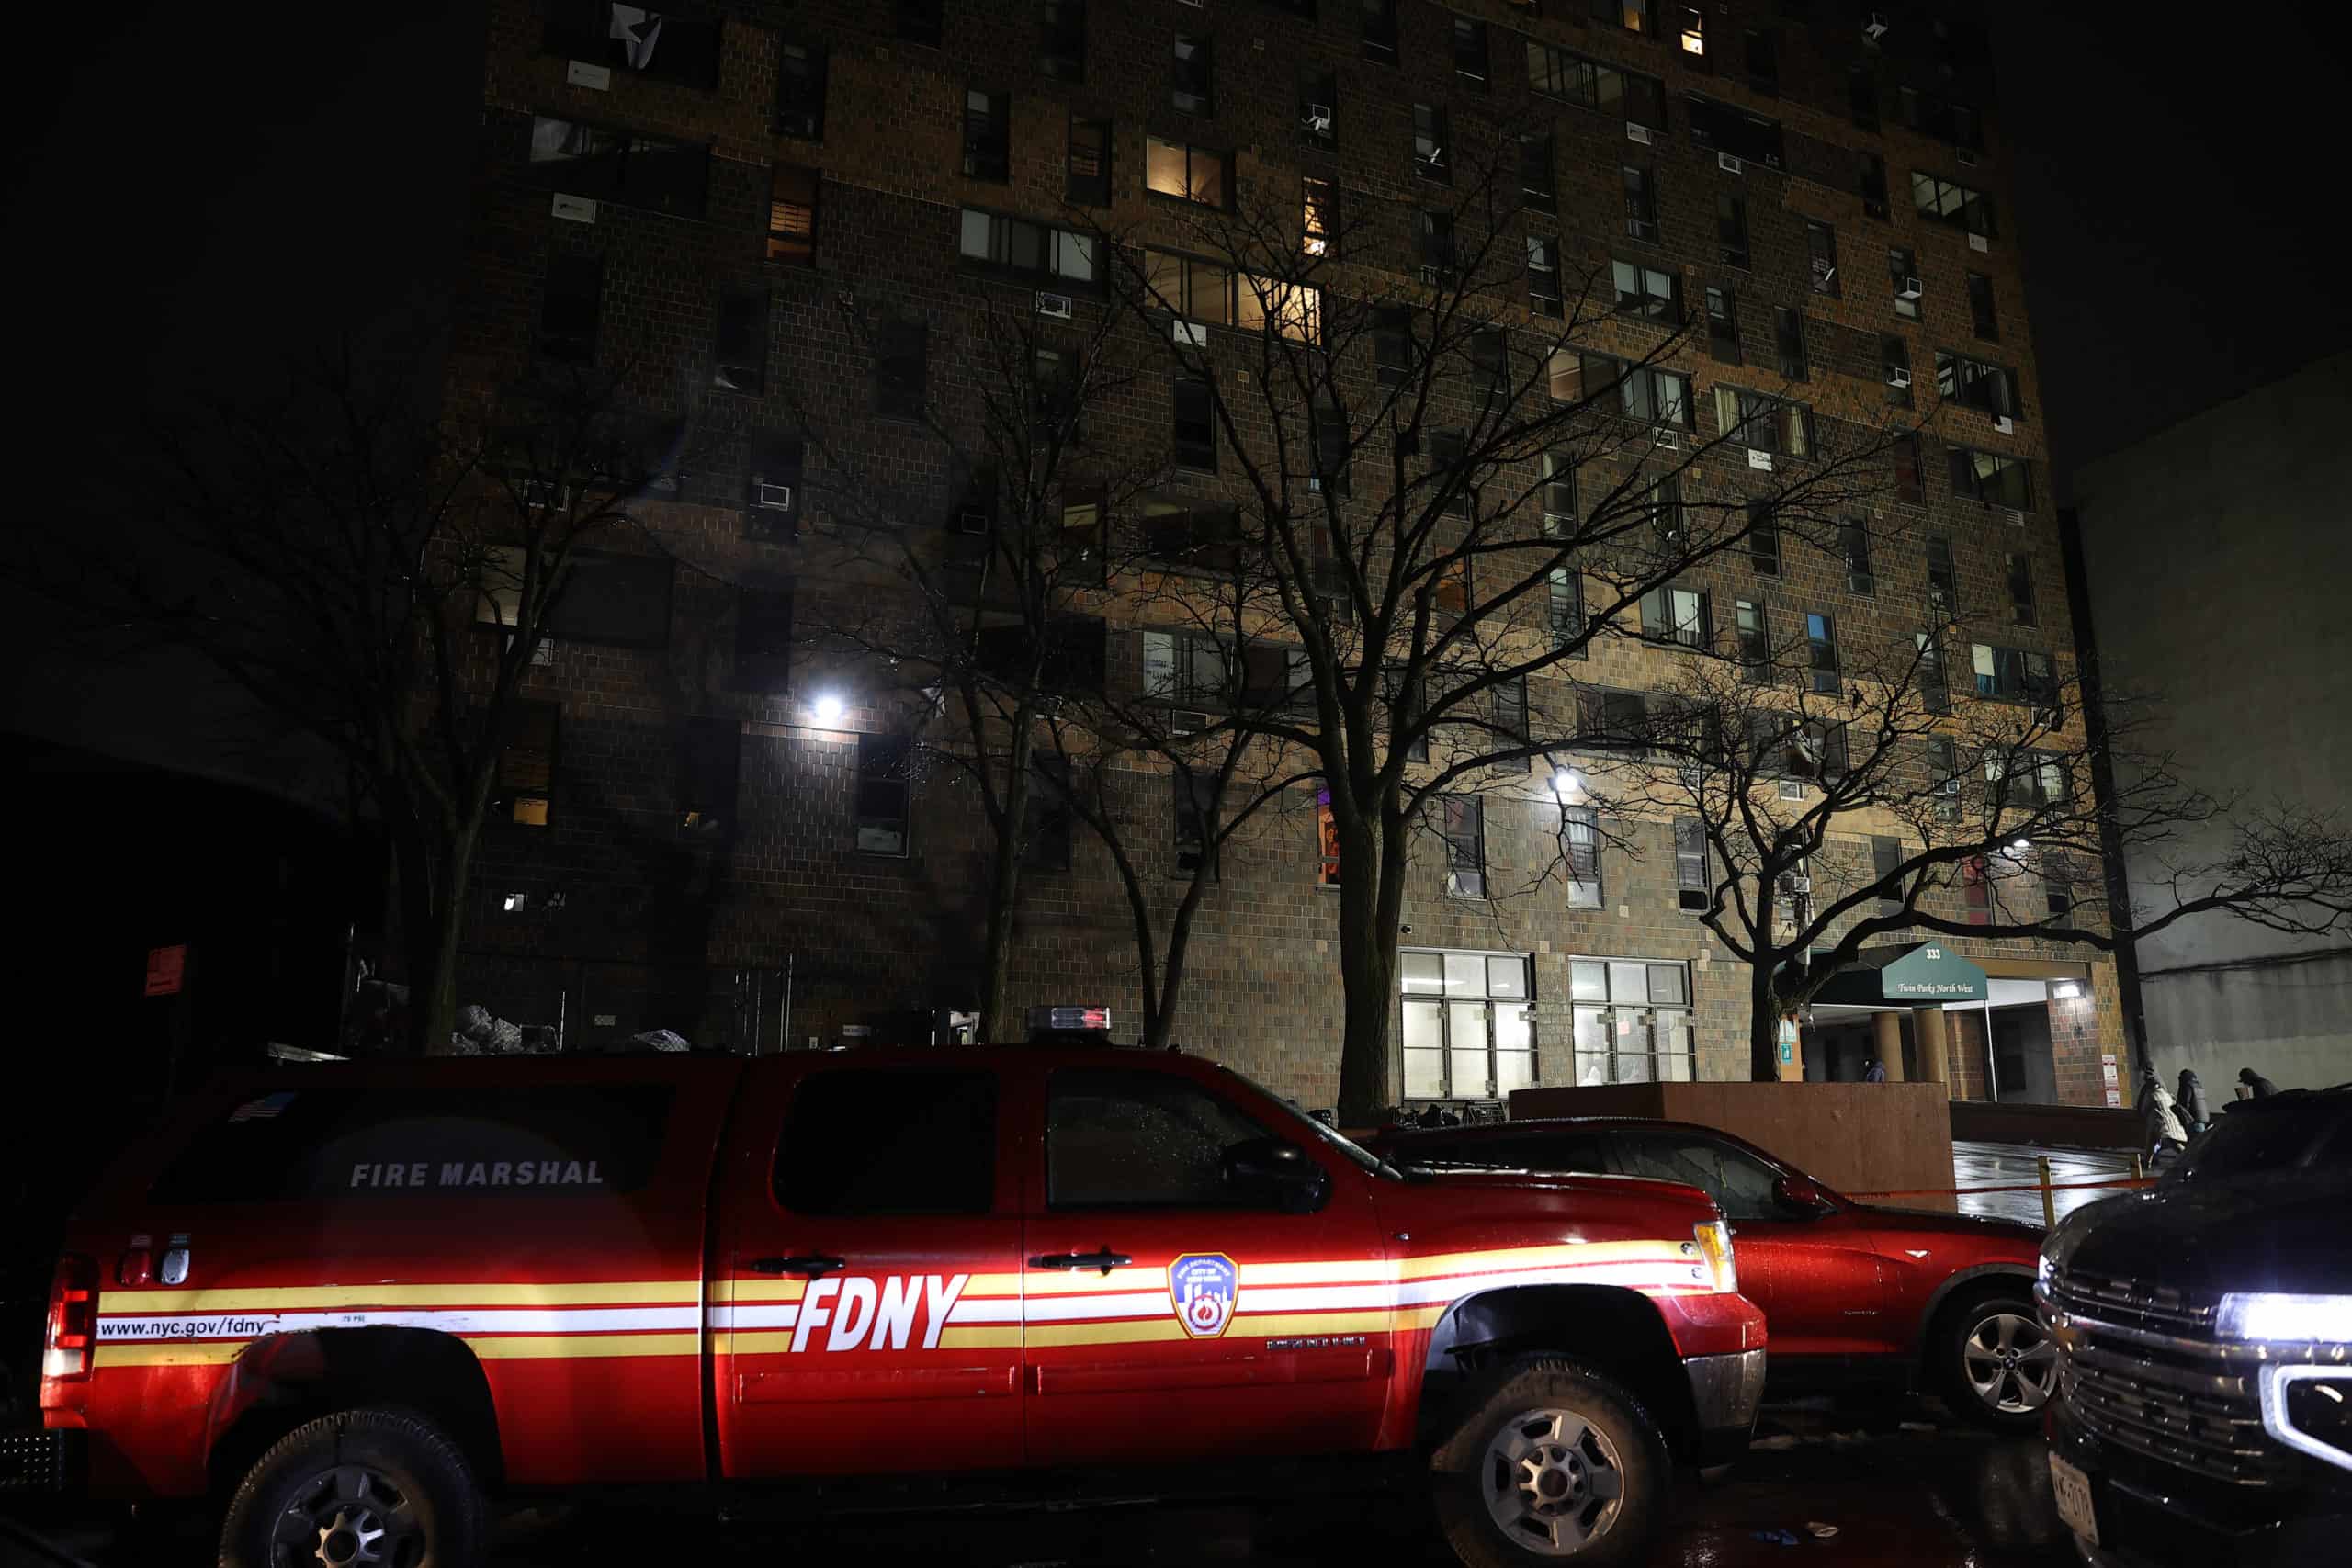 19 people were killed early Sunday after a fire caused by a space heater, ripped through an apartment building in the Bronx.